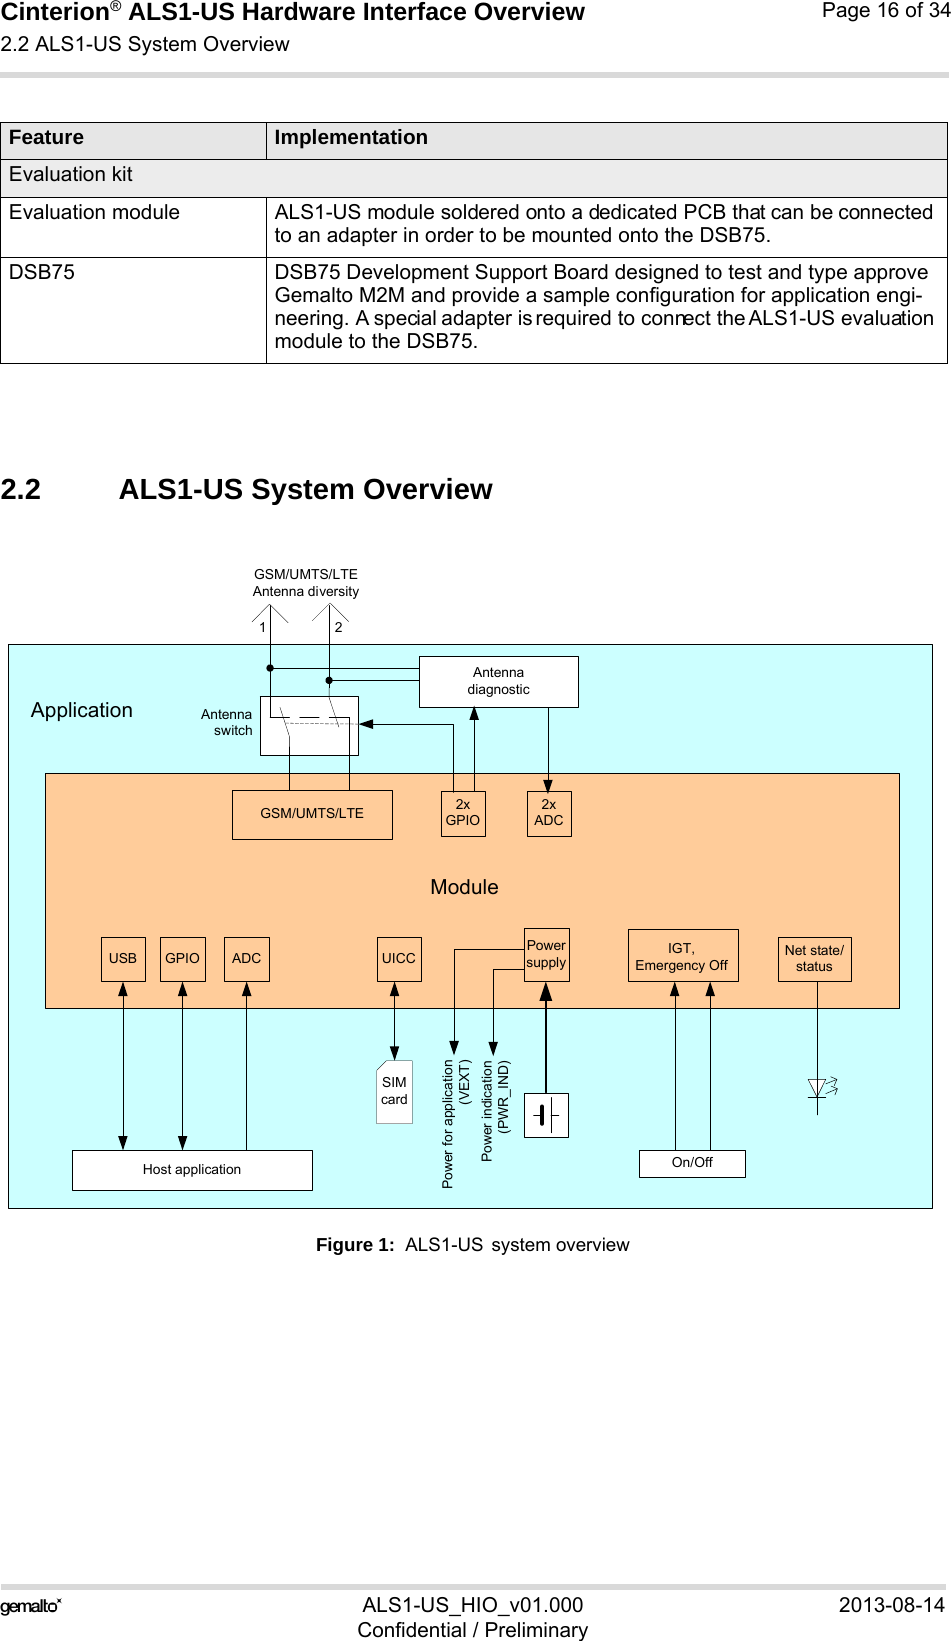 Cinterion® ALS1-US Hardware Interface Overview2.2 ALS1-US System Overview16ALS1-US_HIO_v01.000 2013-08-14Confidential / PreliminaryPage 16 of 342.2 ALS1-US System OverviewFigure 1:  ALS1-US system overviewEvaluation kitEvaluation module ALS1-US module soldered onto a dedicated PCB that can be connected to an adapter in order to be mounted onto the DSB75.DSB75  DSB75 Development Support Board designed to test and type approve Gemalto M2M and provide a sample configuration for application engi-neering. A special adapter is required to connect the ALS1-US evaluation module to the DSB75.Feature ImplementationGPIO ADC UICC PowersupplyIGT,Emergency OffNet state/statusSIMcardHost application On/OffModuleApplicationPower indication(PWR_IND)GSM/UMTS/LTEPower for application(VEXT)USBGSM/UMTS/LTE Antenna diversity12Antenna diagnosticAntenna switch2x GPIO2x ADC